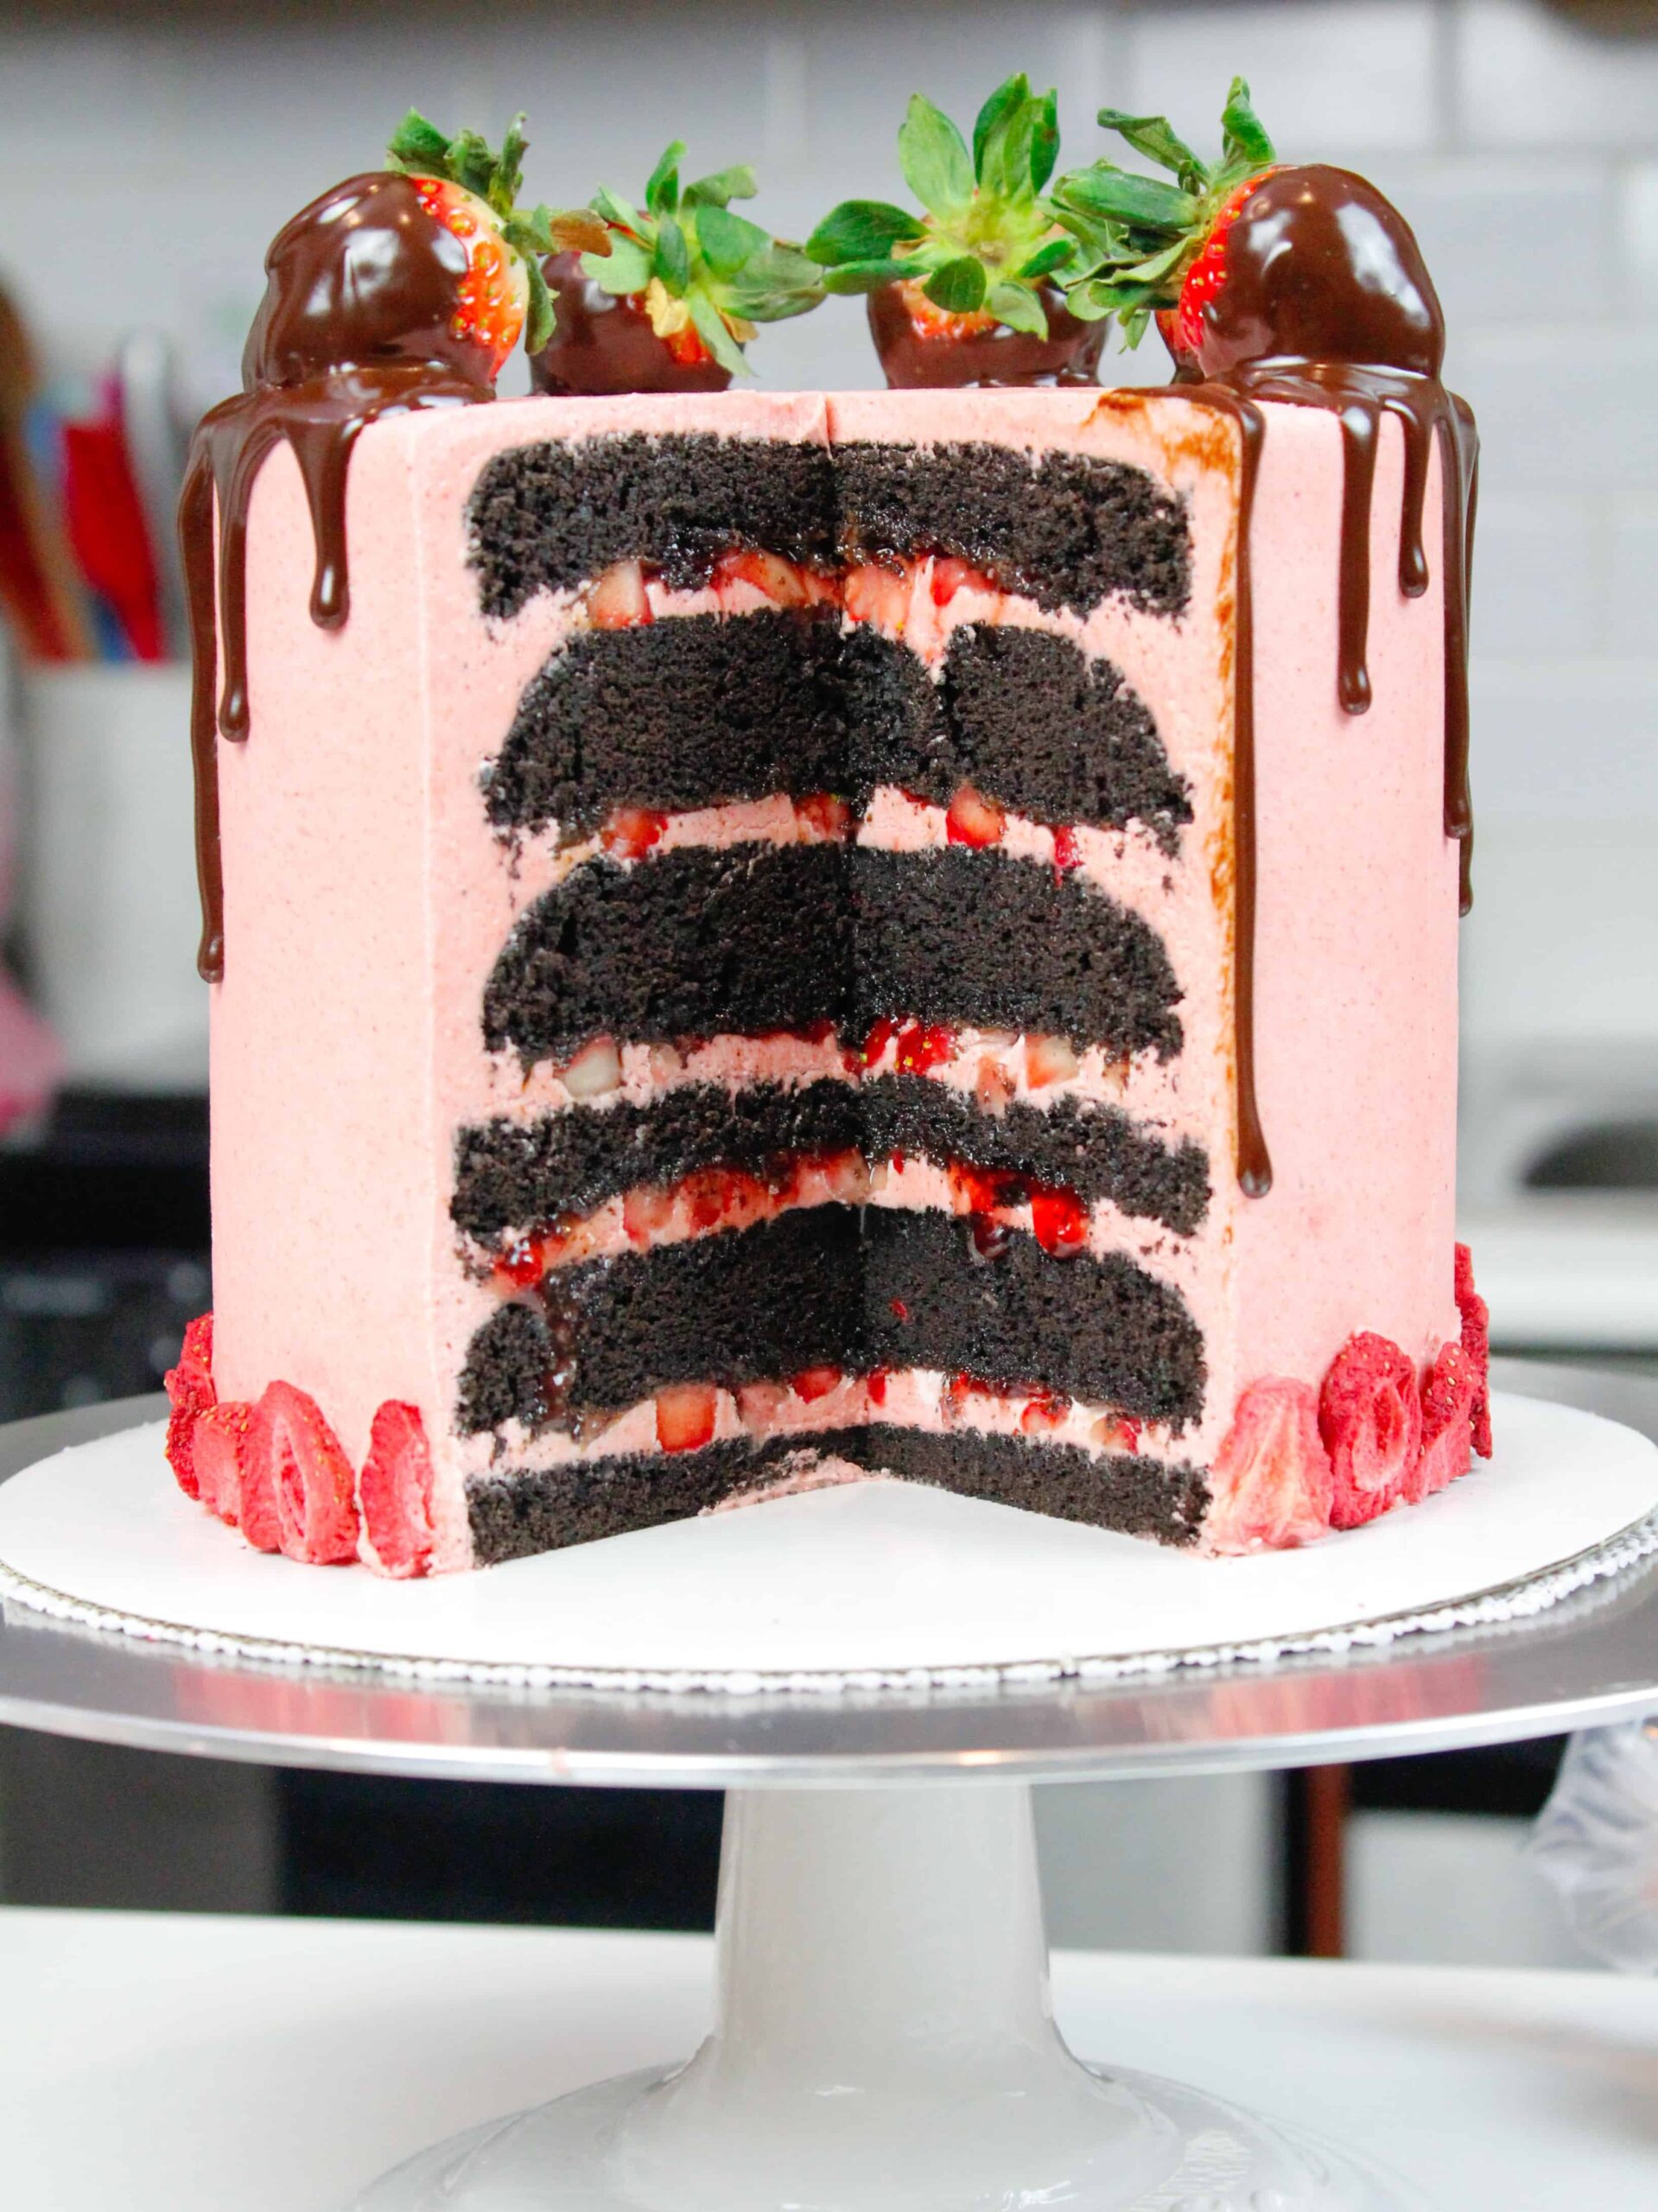 image of chocolate cake with strawberry buttercream and fresh strawberry filling